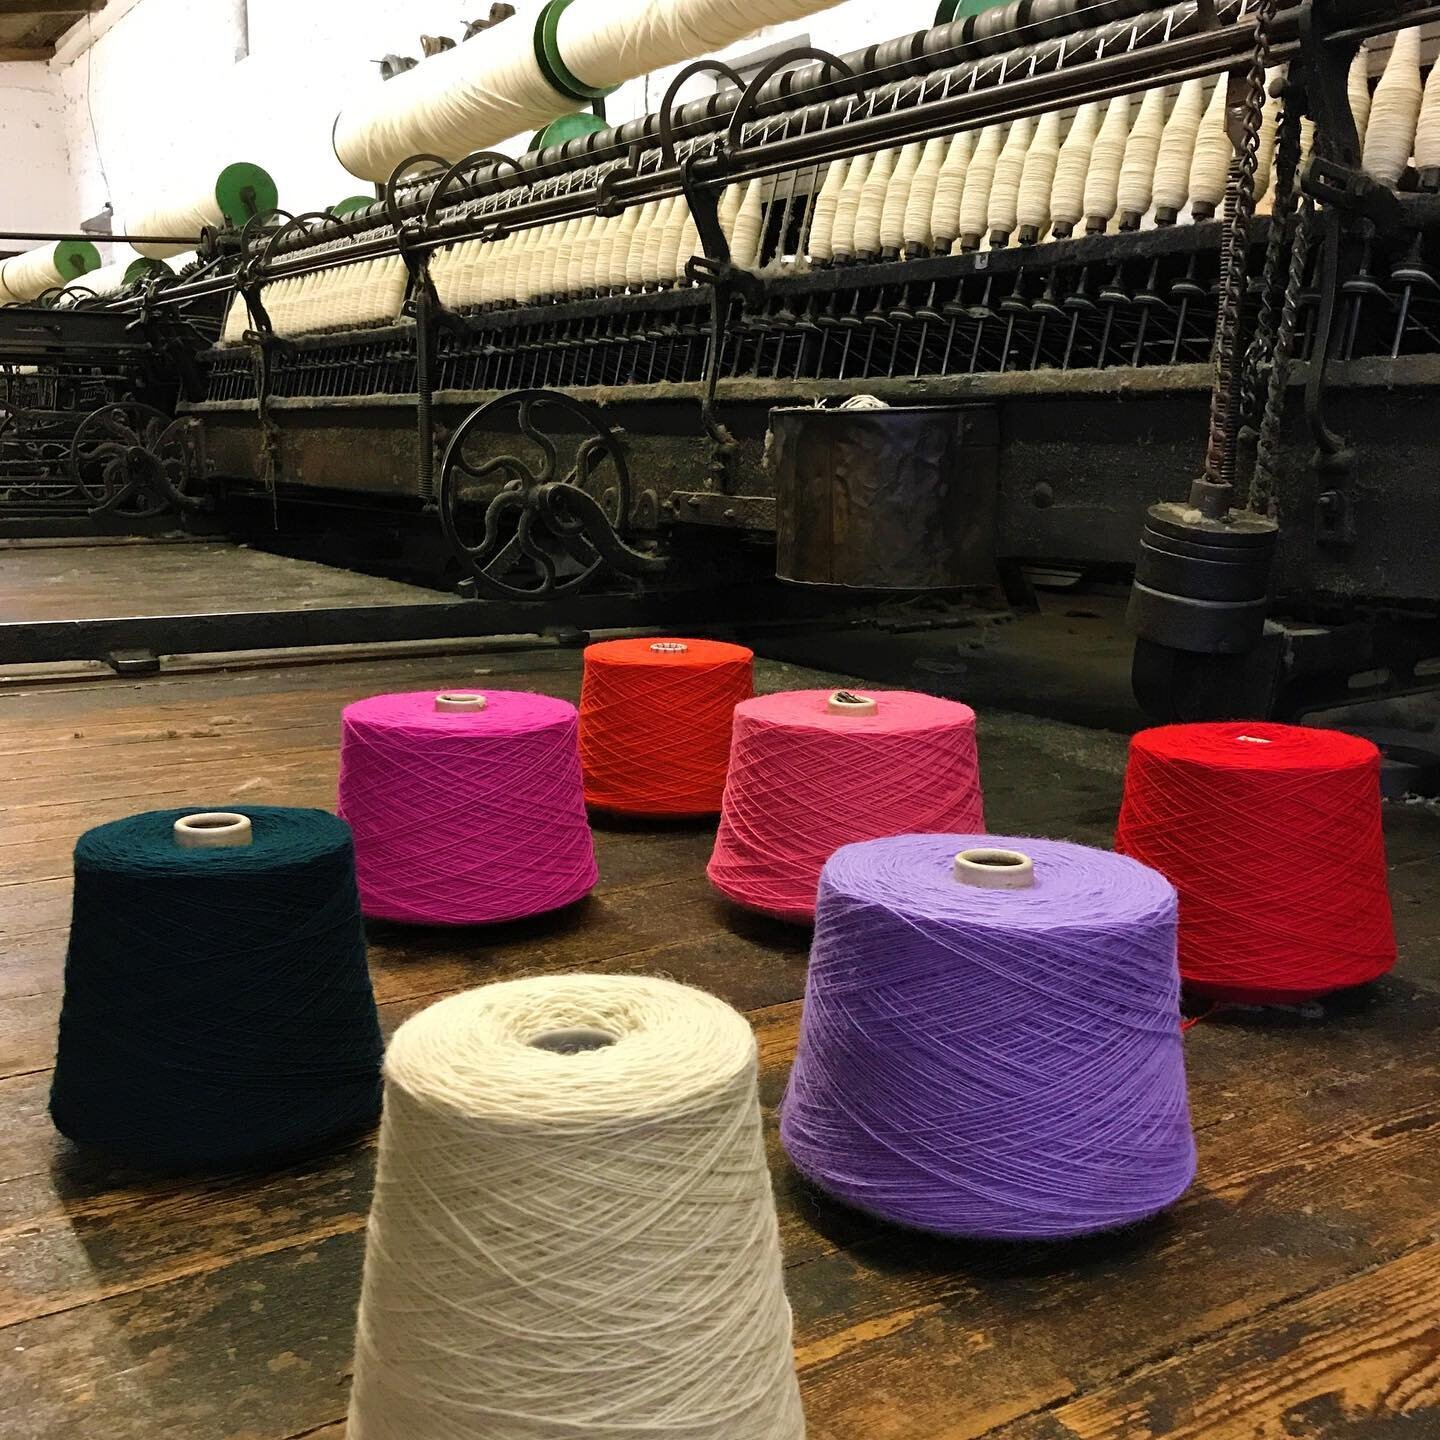 Joy in the journey 
A snapshot of the process of my blanket collaboration with @cushendale woollen mills in ireland. Creating superior textiles from the 18th century to the present day. A remarkable story of one family&rsquo;s vocation to woollen tex